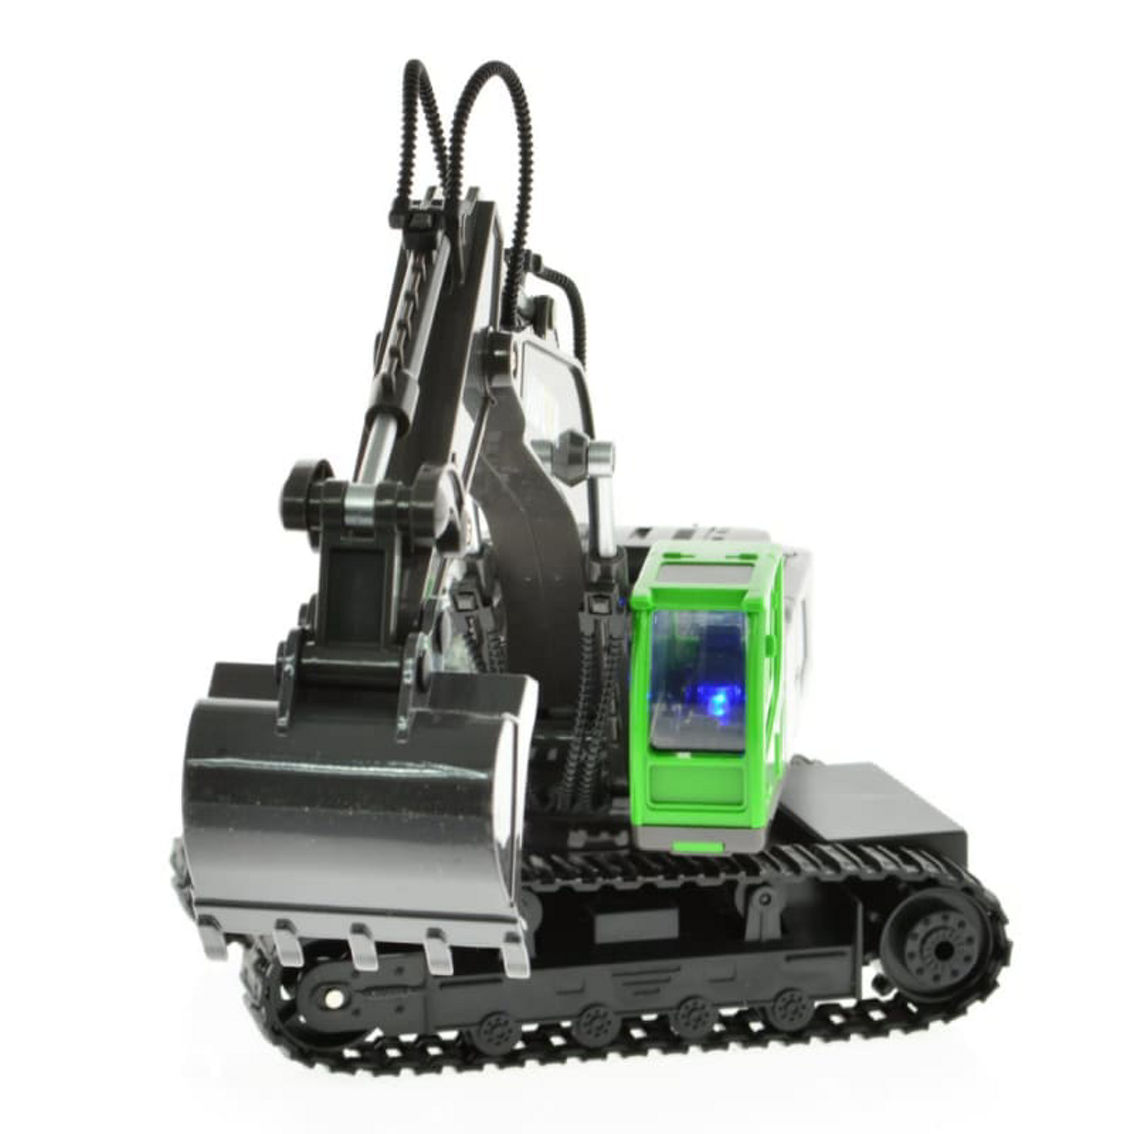 CIS-1558 1:18 scale 2.4 GHz 11 channel plastic excavator - Image 3 of 5